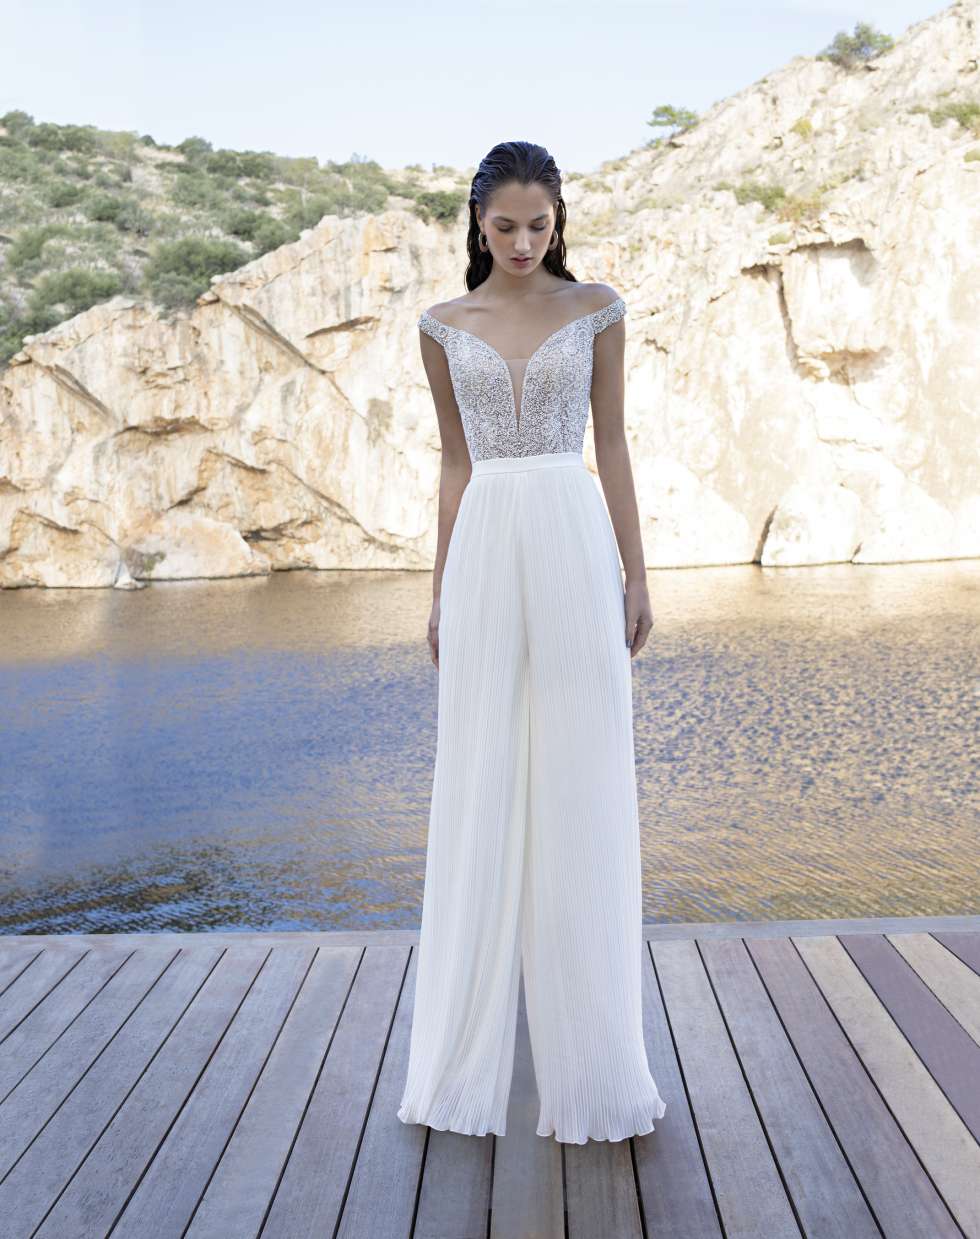 The Forget Me Not Bridal Collection by Demetrios for 2020